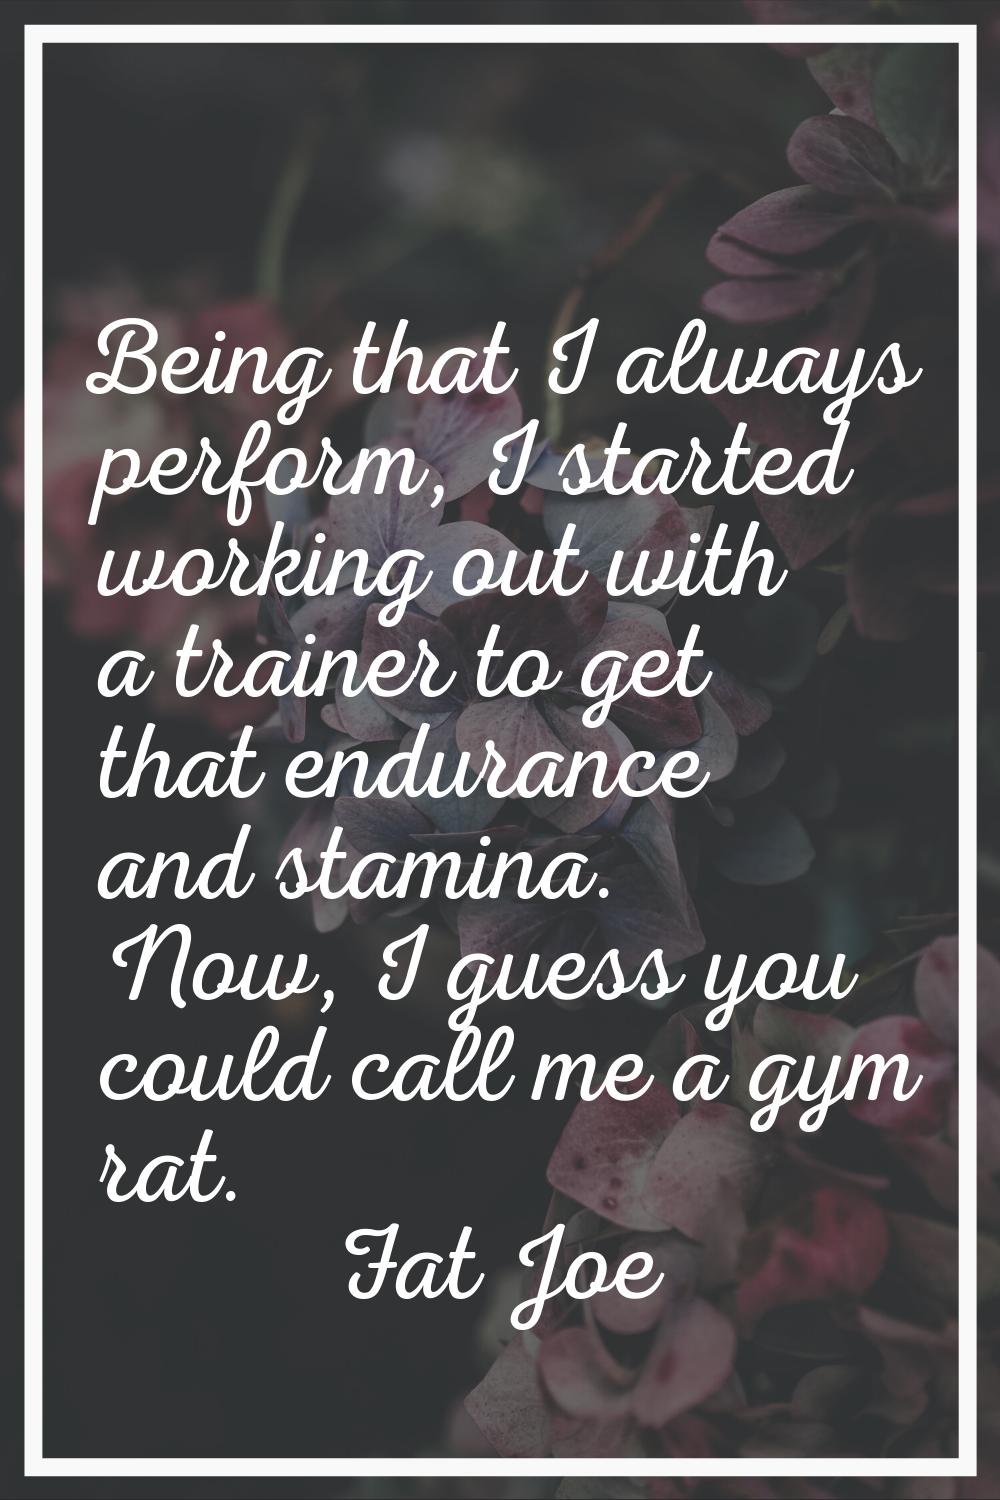 Being that I always perform, I started working out with a trainer to get that endurance and stamina